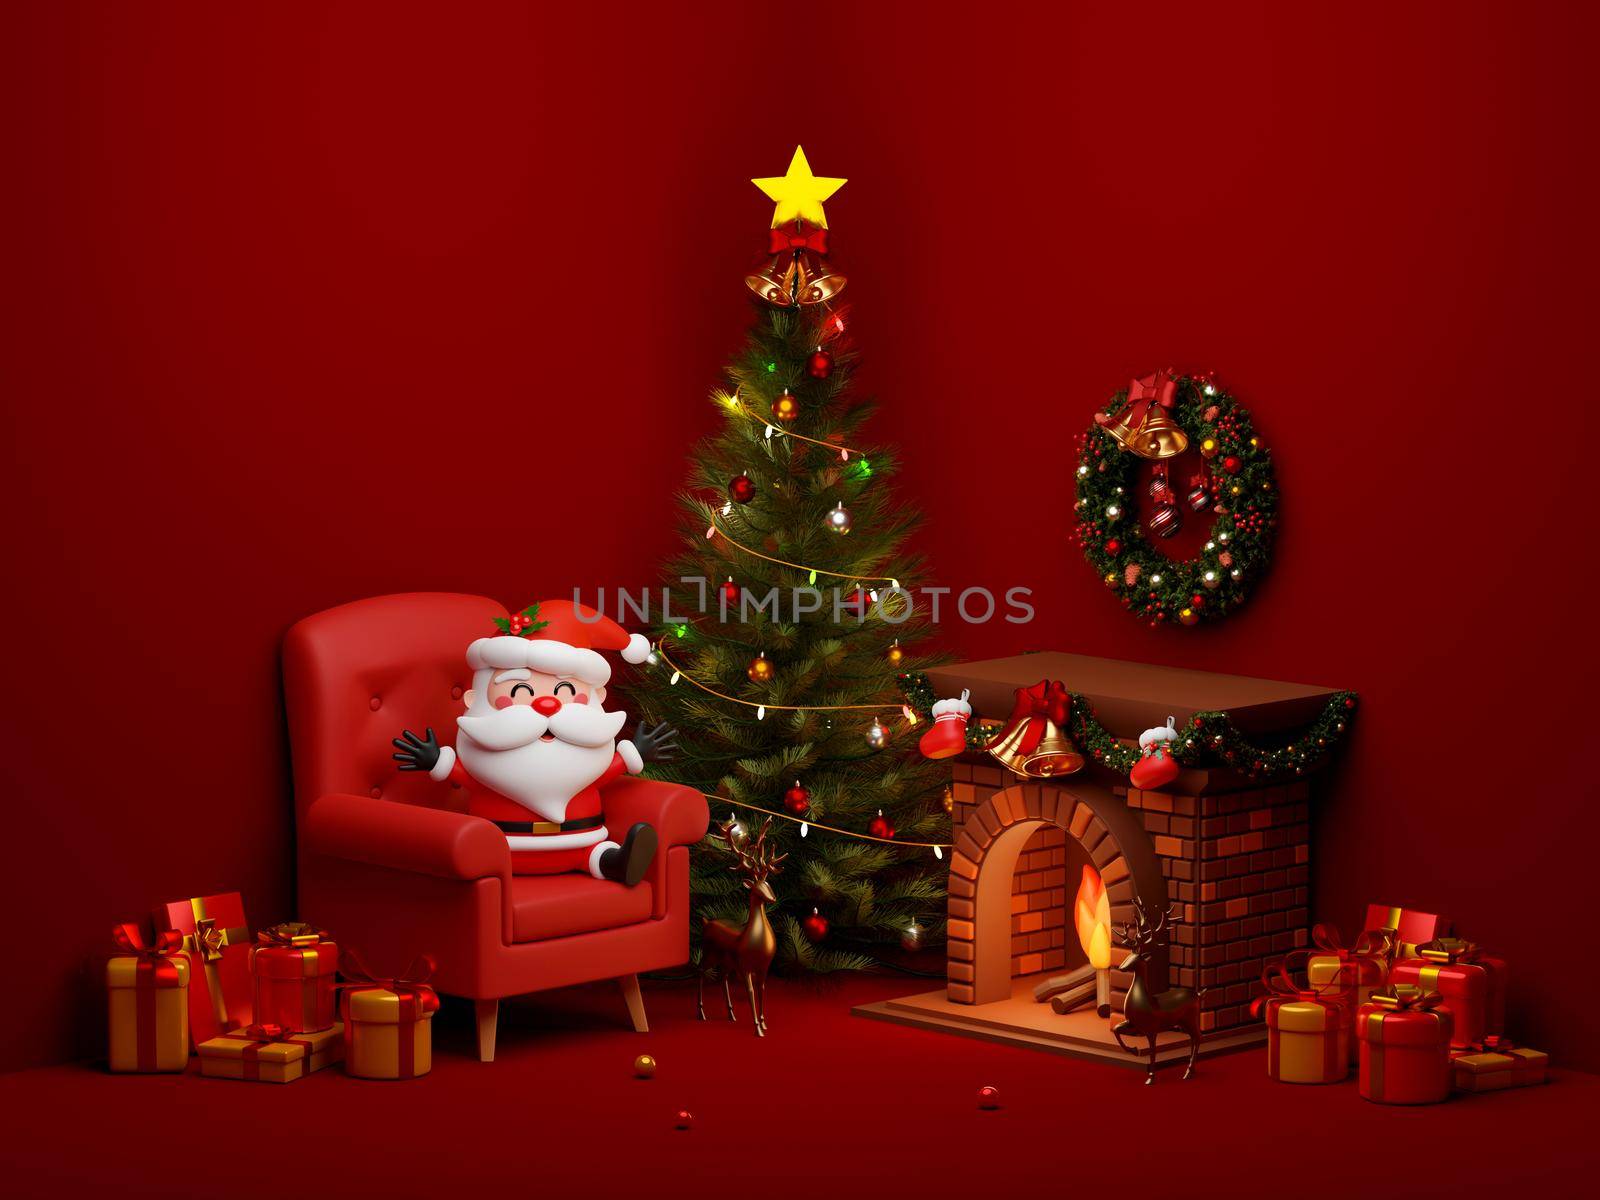 Santa Claus sitting in front of fireplace in room decorated by Christmas tree and gift box, 3d illustration